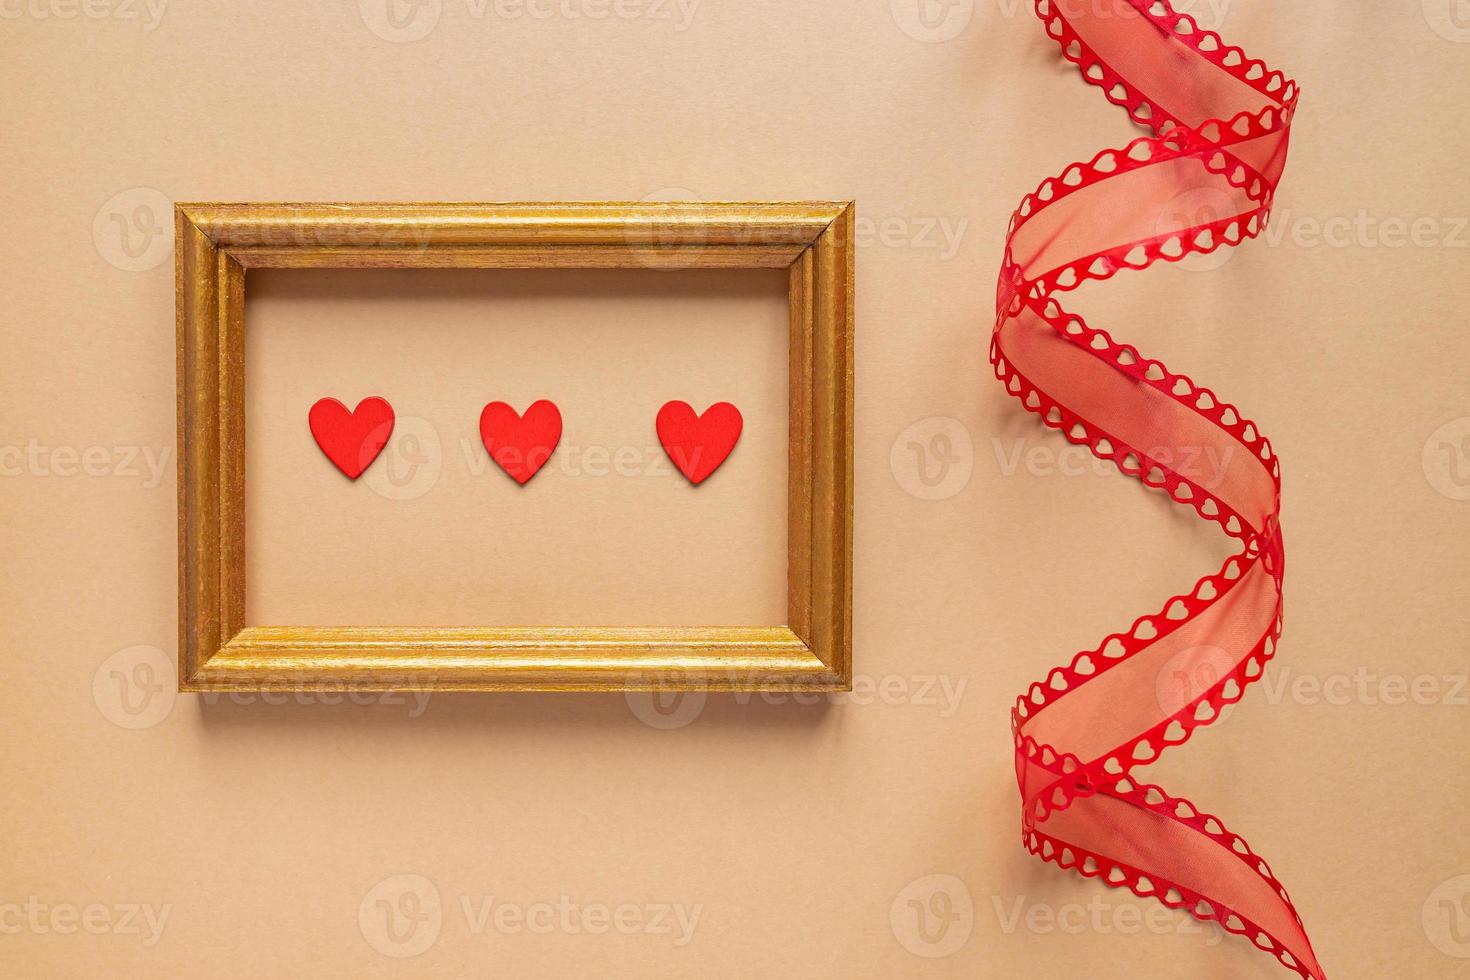 Valentine's day or Wedding romantic concept. Twisted decorative ribbon and golden photo frame with red hearts on beige background.